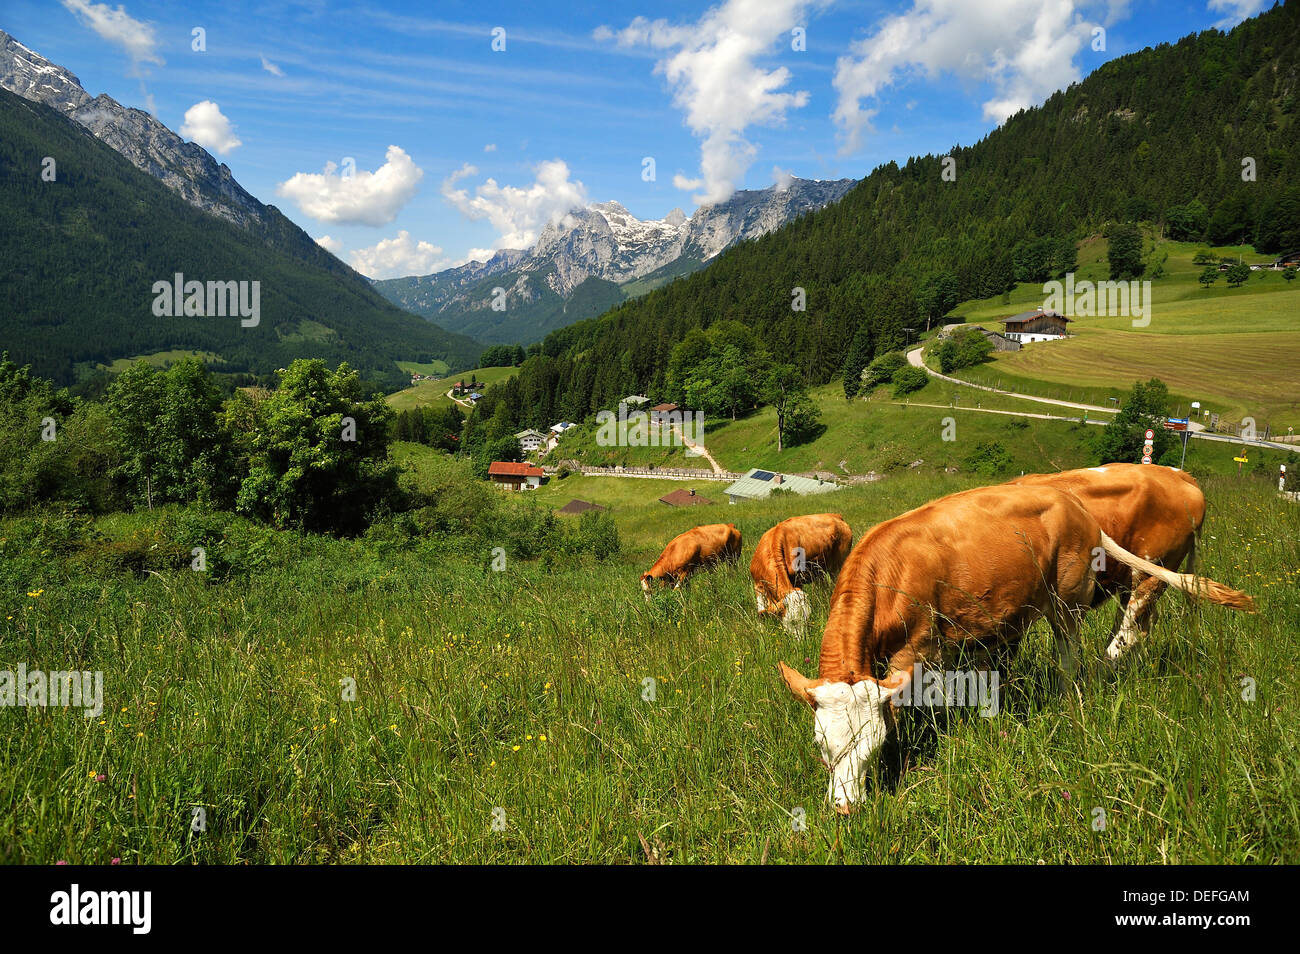 Grazing cows on a meadow in the Berchtesgaden Alps, Reiteralpe Mountain at the rear, Ramsau bei Berchtesgaden Stock Photo